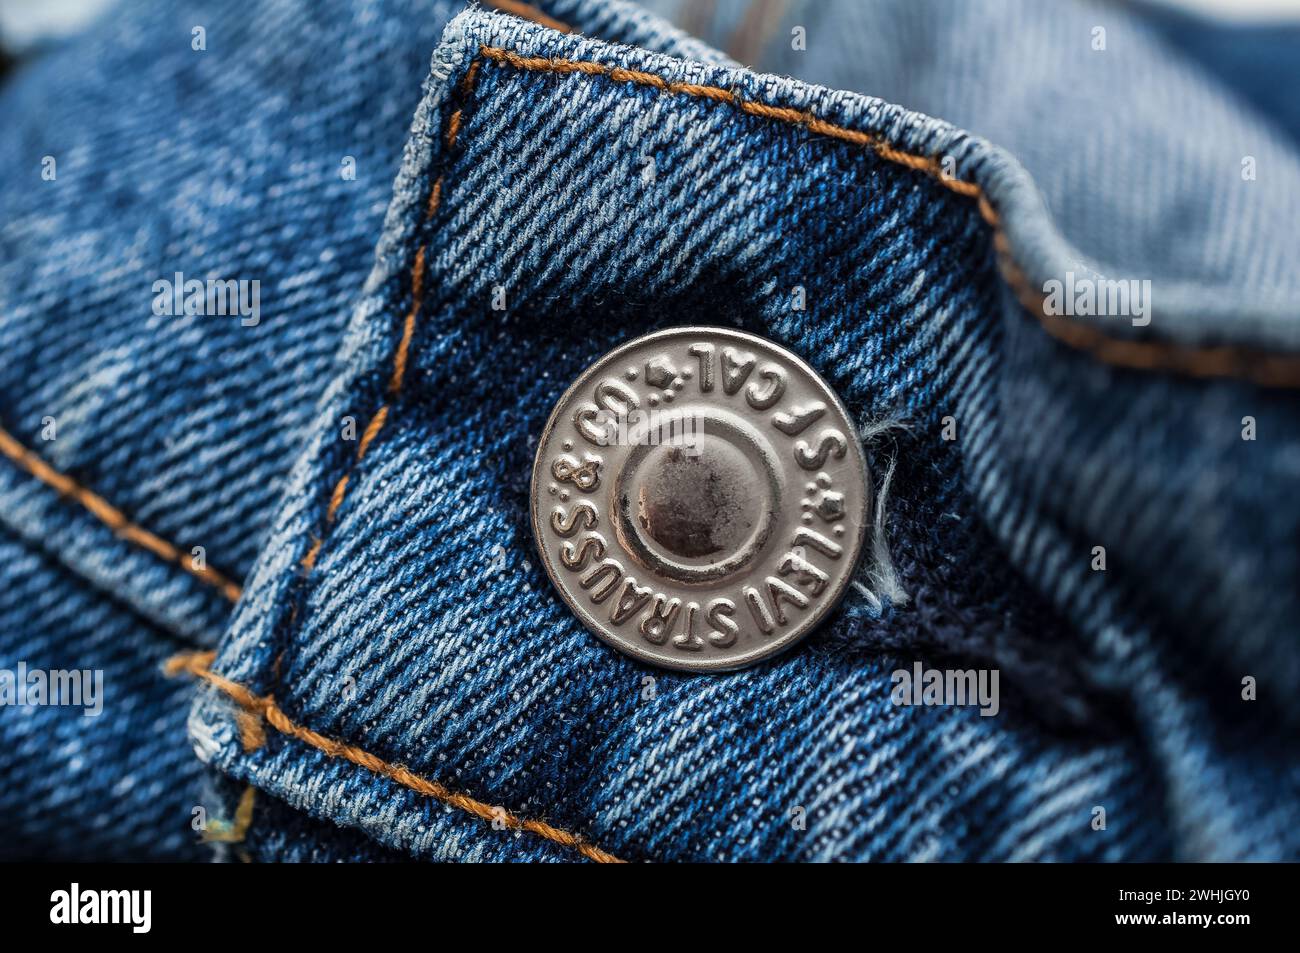 New LEVI'S jeans. LEVI'S is a brand name of Levi Strauss and Co, founded in 1853 Stock Photo